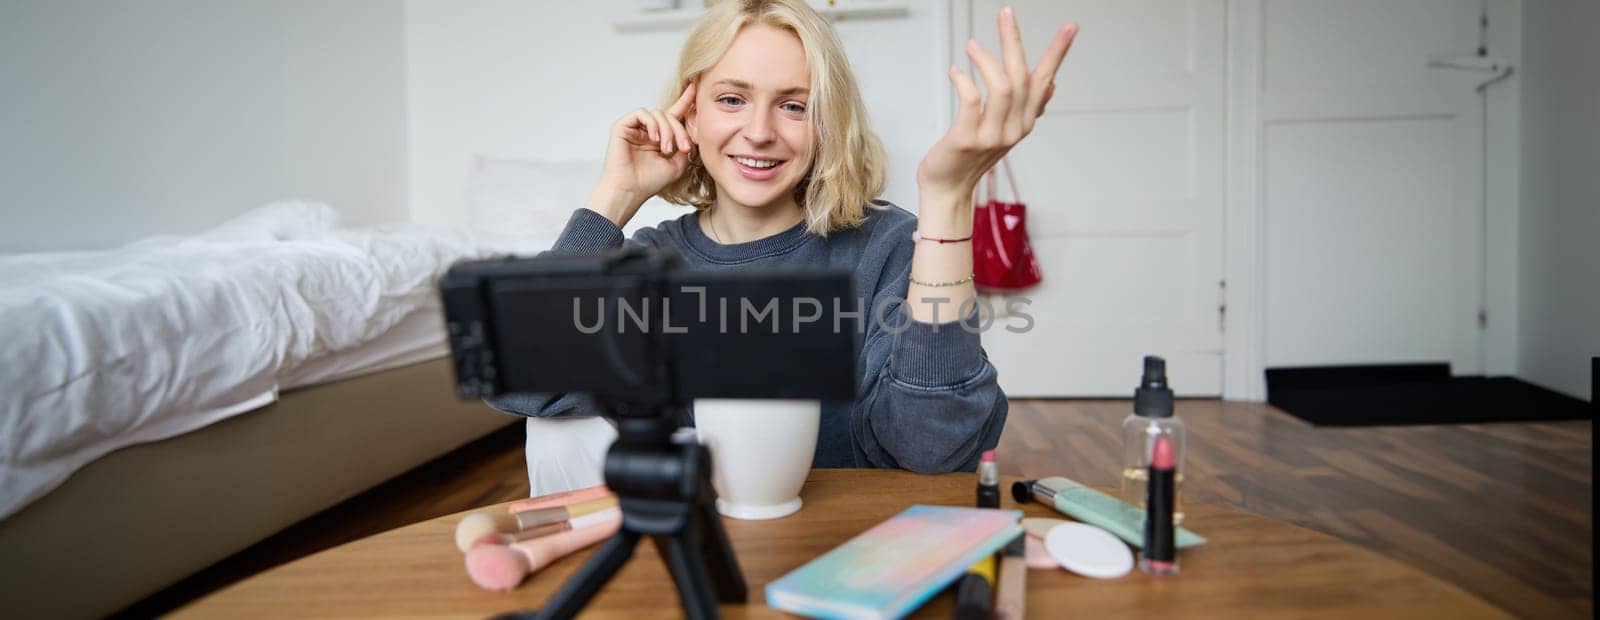 Portrait of young teenage girl in her room, recording a vlog, daily lifestyle video for social media, internet influencer advertising product online, talking to the camera, sitting on the floor.